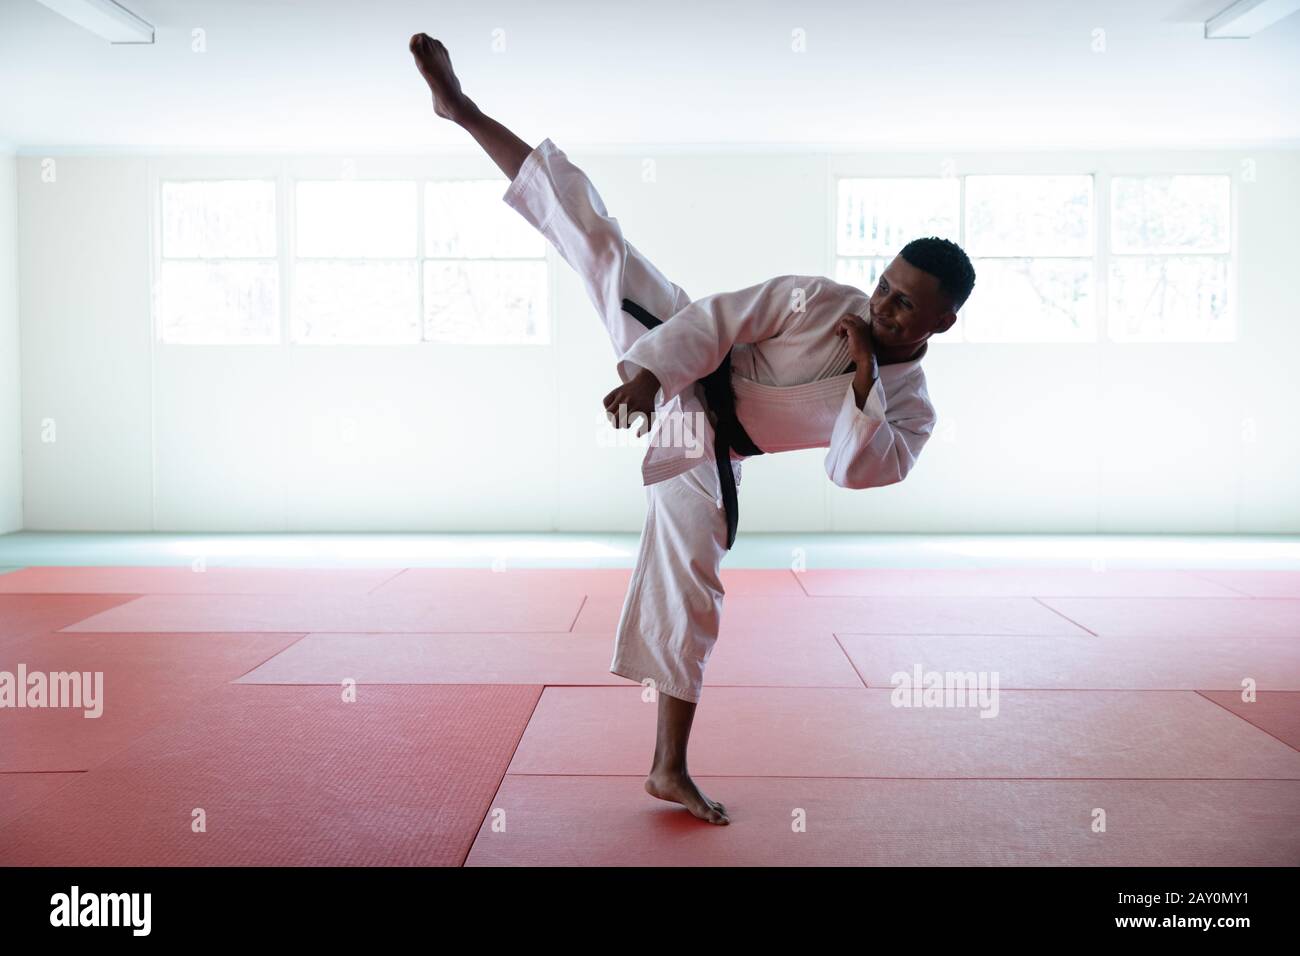 Karate stretching his leg up and kicking the air Stock Photo - Alamy